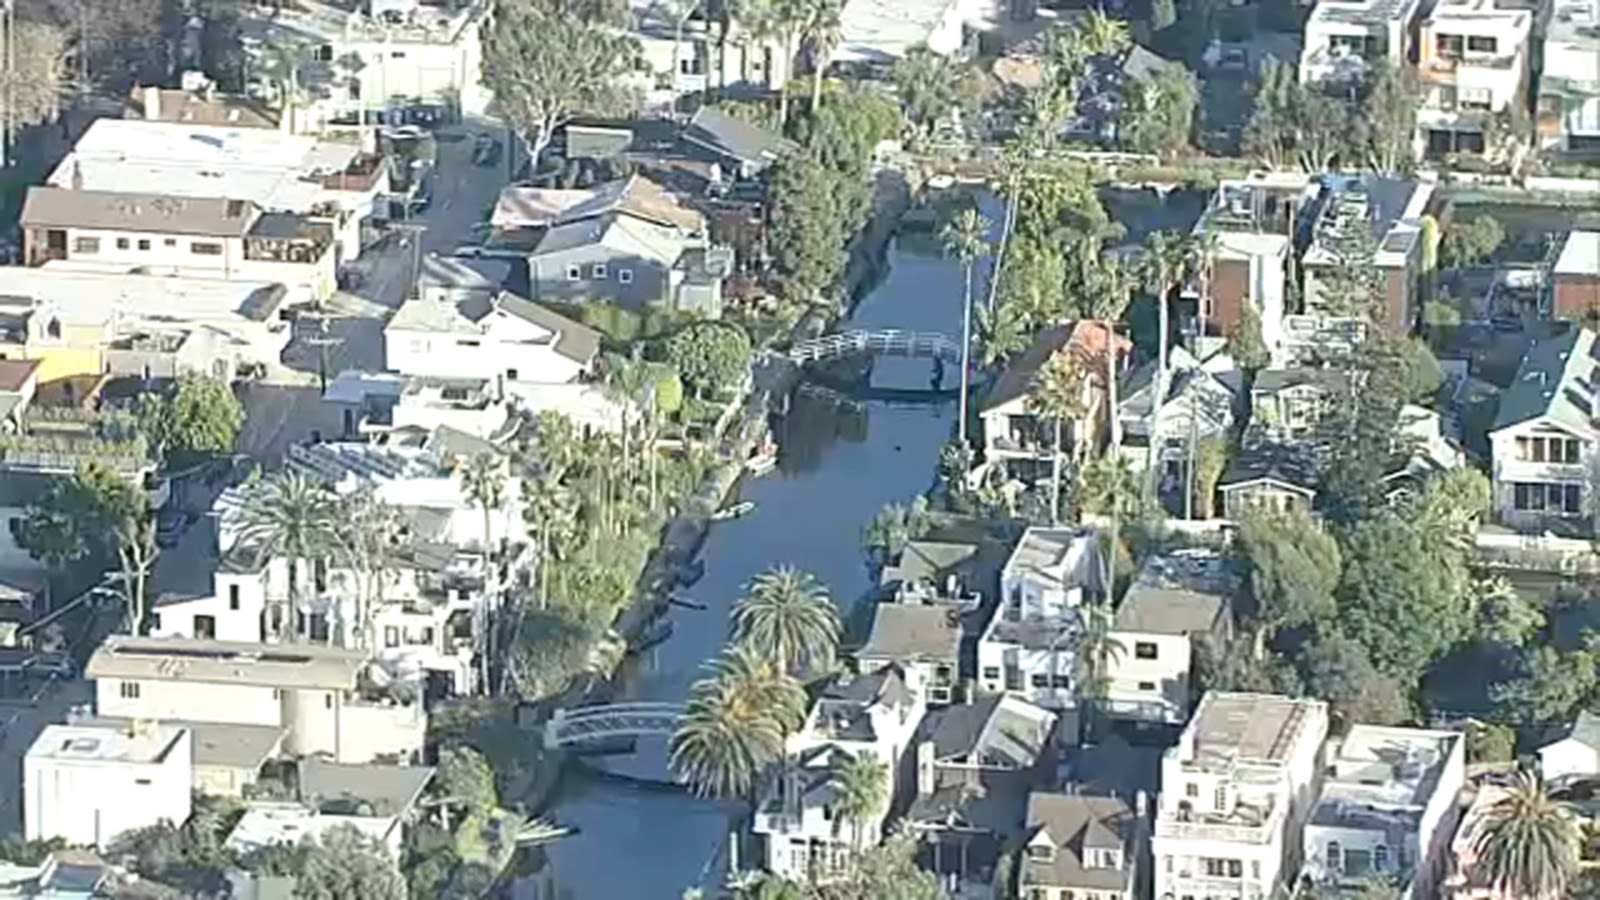 Woman declared brain dead after vicious attack near Venice canals